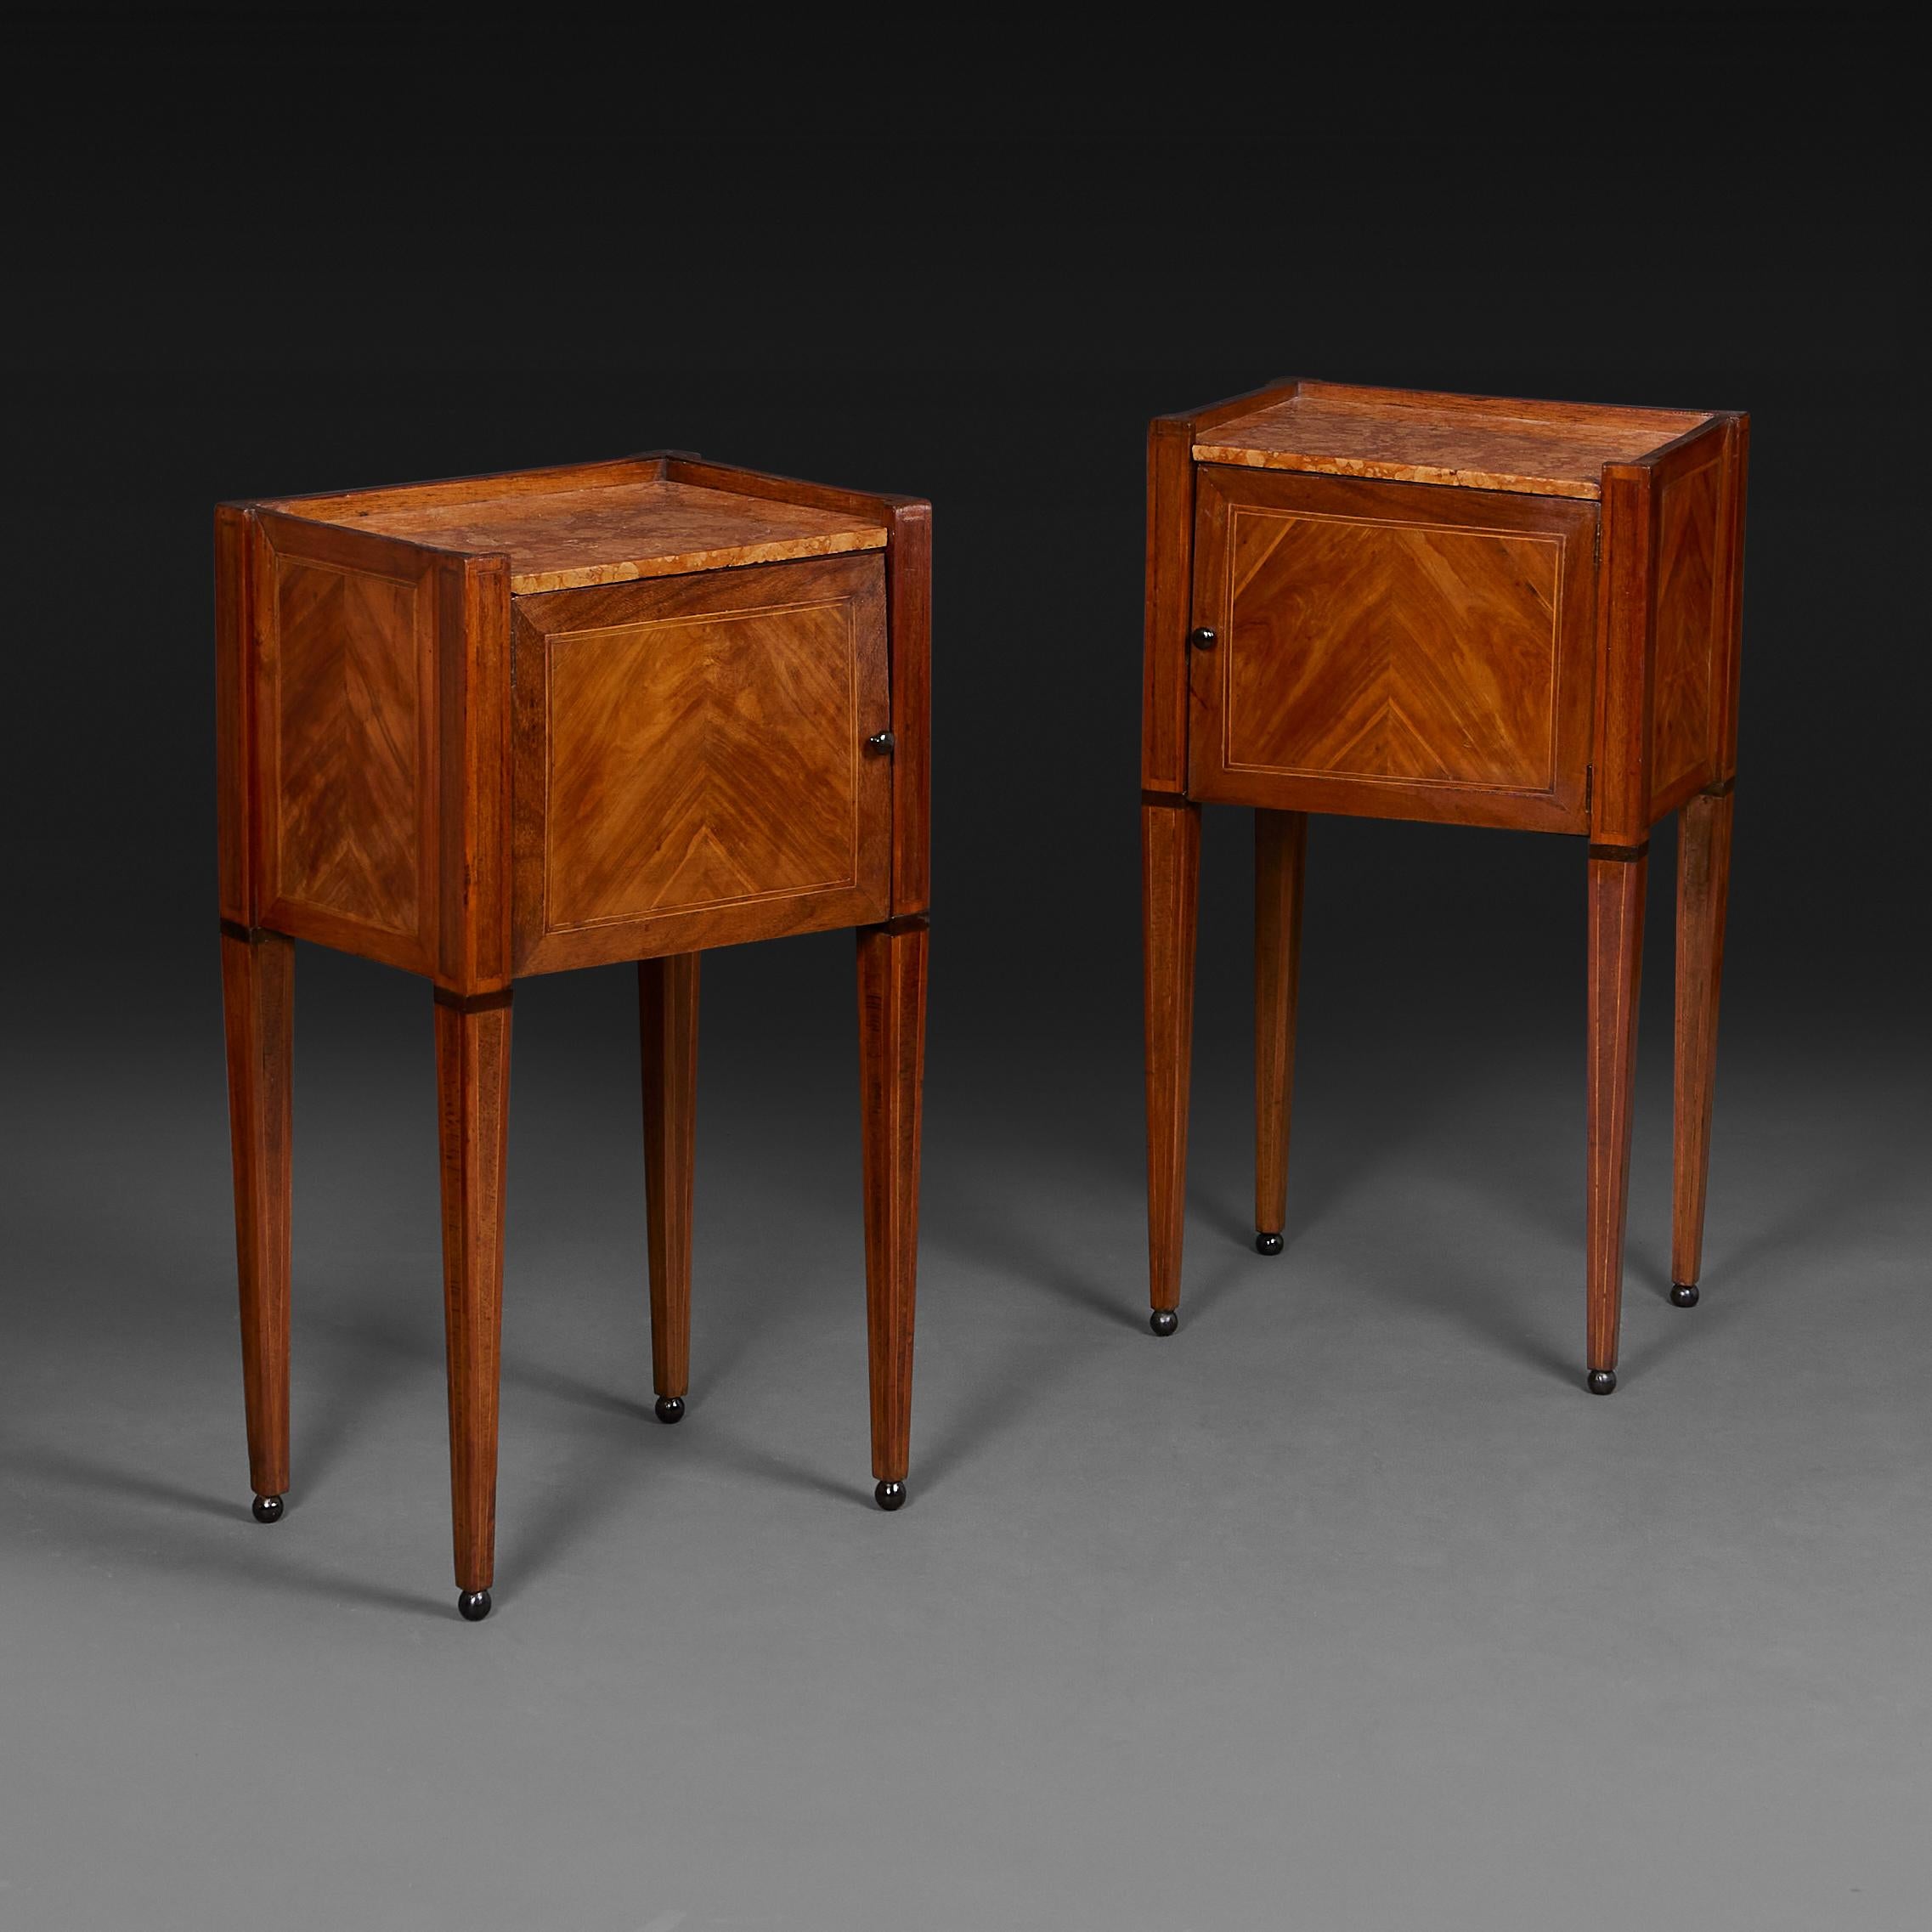 France, circa 1850

A fine pair of mid nineteenth century French marquetry bedside cabinets, with the original Rosa Verona inset marble tops, with single cupboard door to the fronts, all supported on tapering legs, terminating in ebonised ball